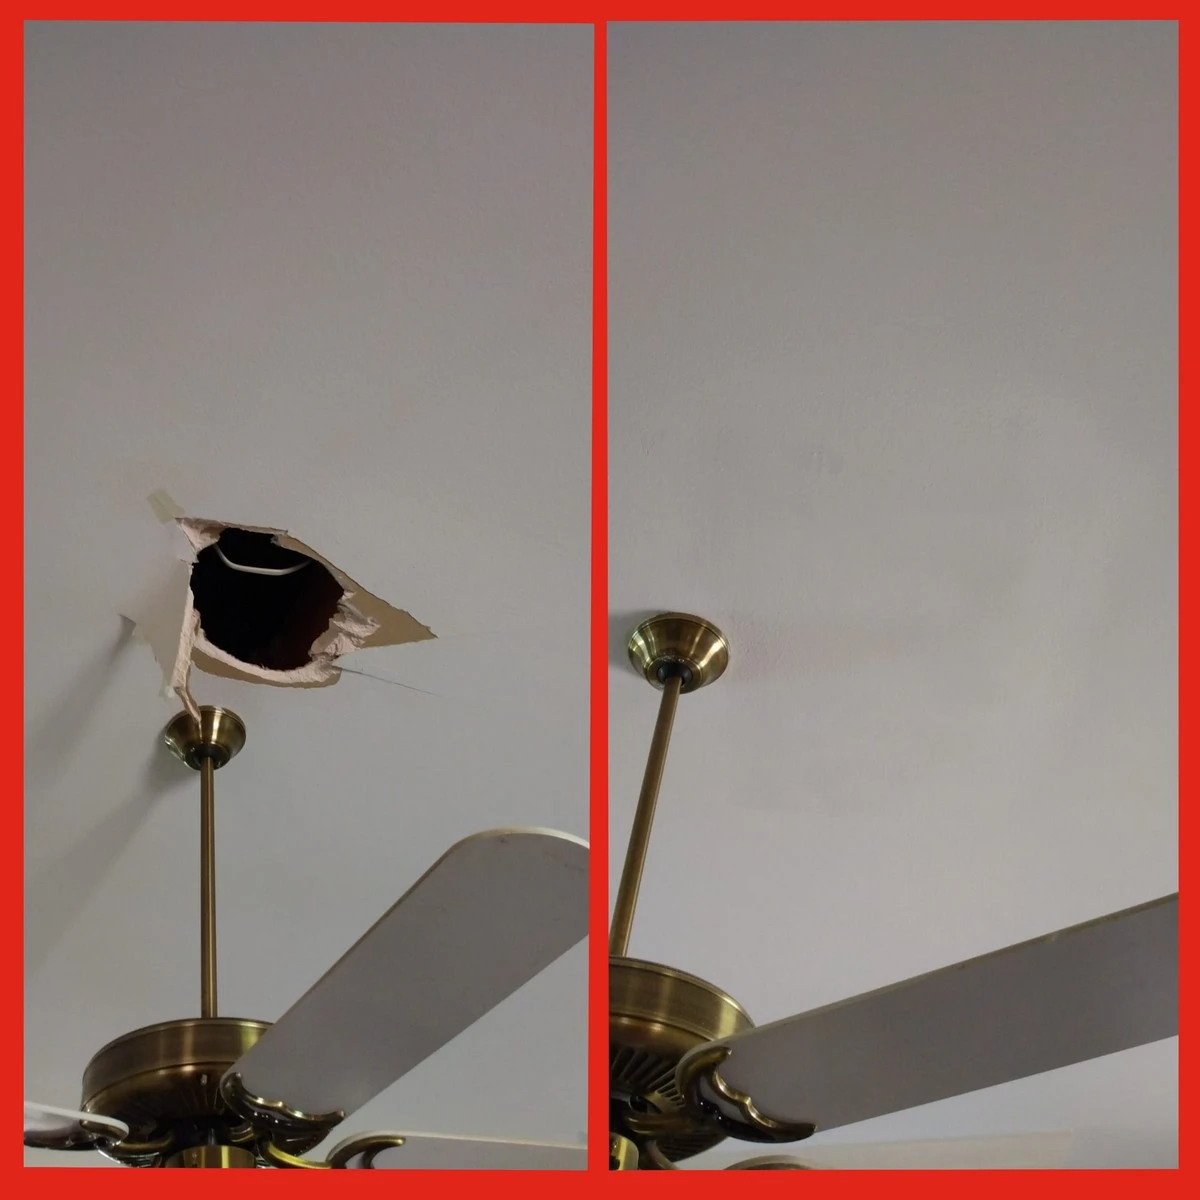 A section of a ceiling above a ceiling fan with a hole near the base of the fan and the same ceiling after Mr. Handyman has fixed the hole and refinished the ceiling with services for drywall repair in Briaroaks, TX.